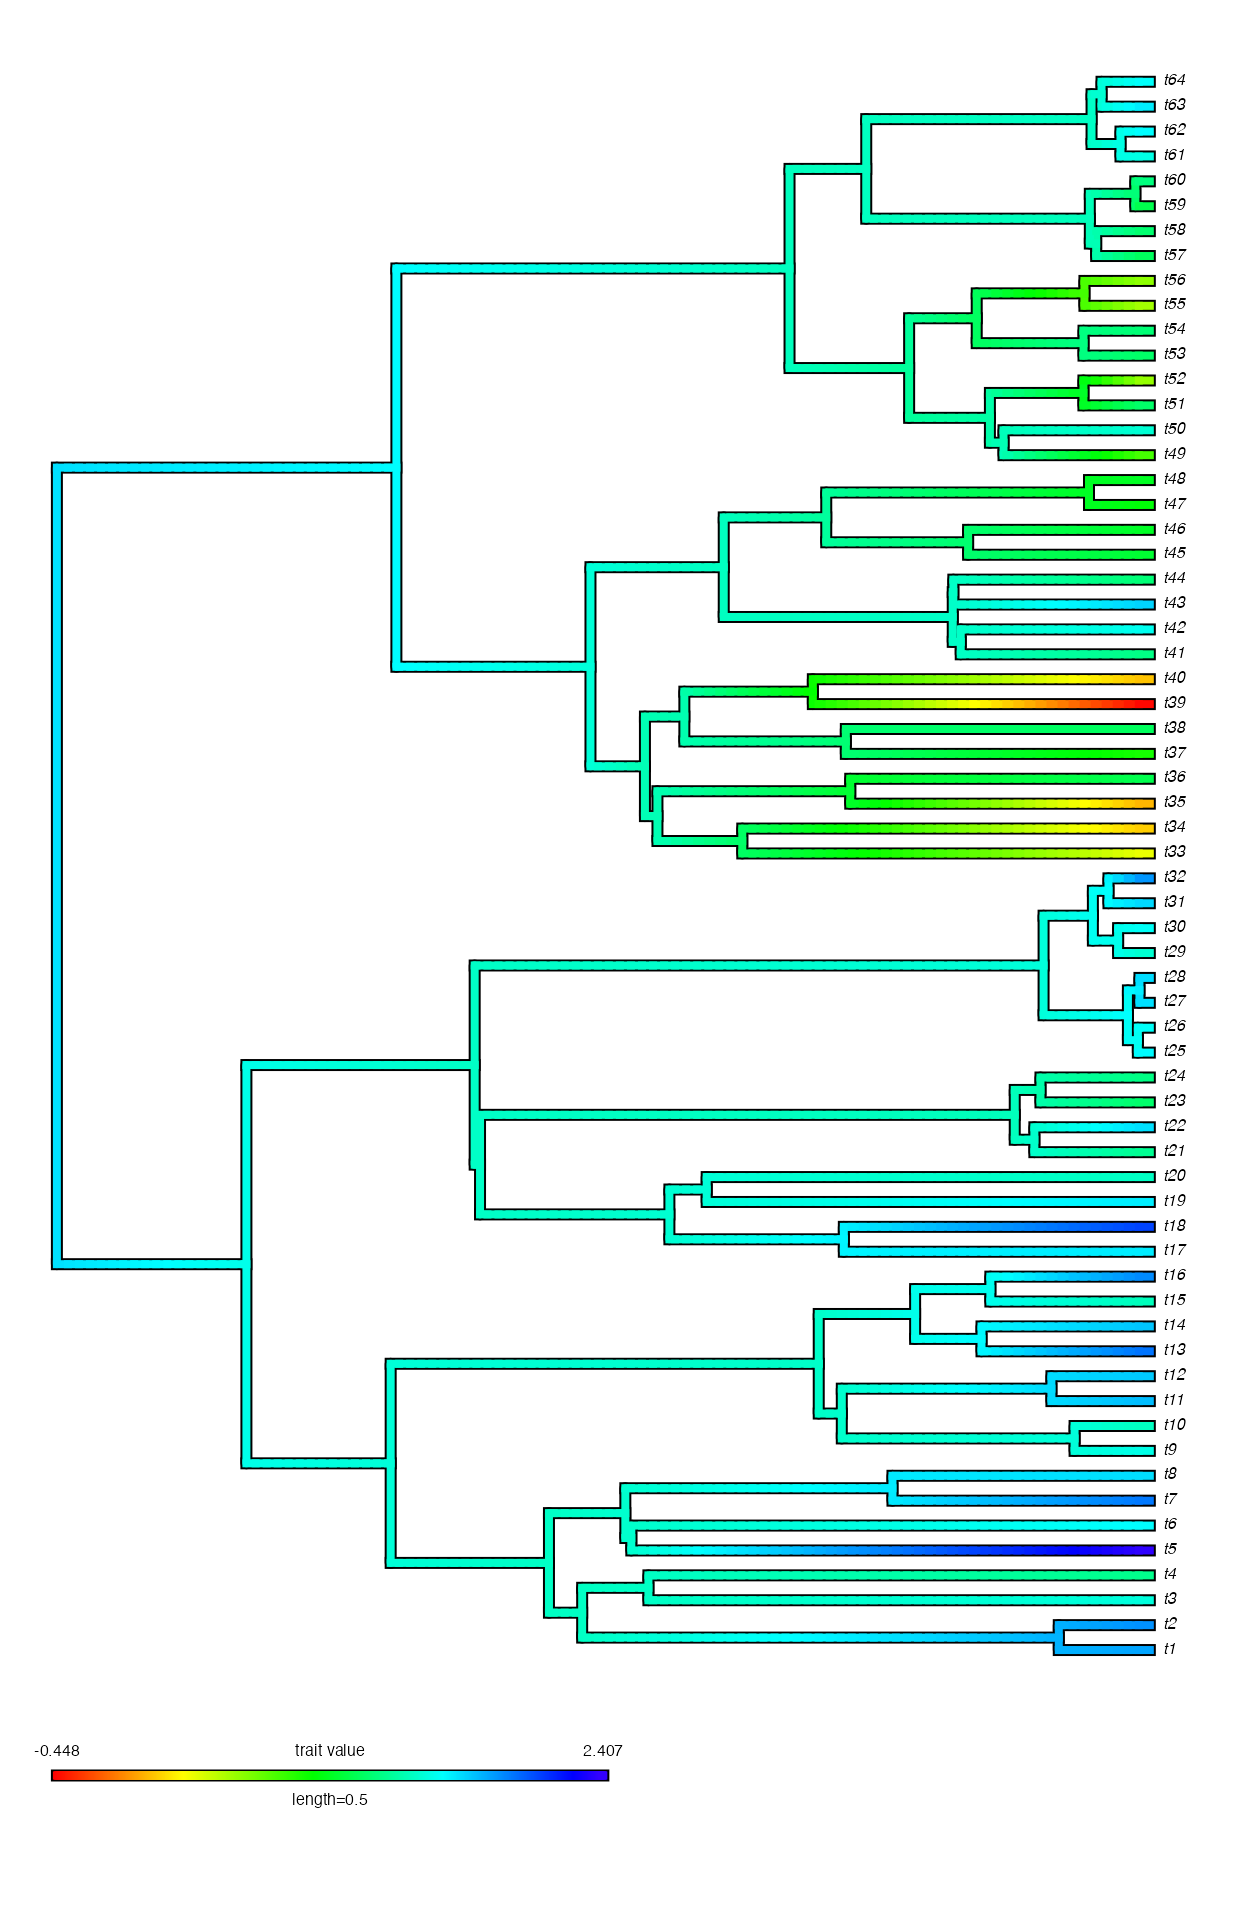 A plot of the ancestral state reconstruction under an OUwie model.